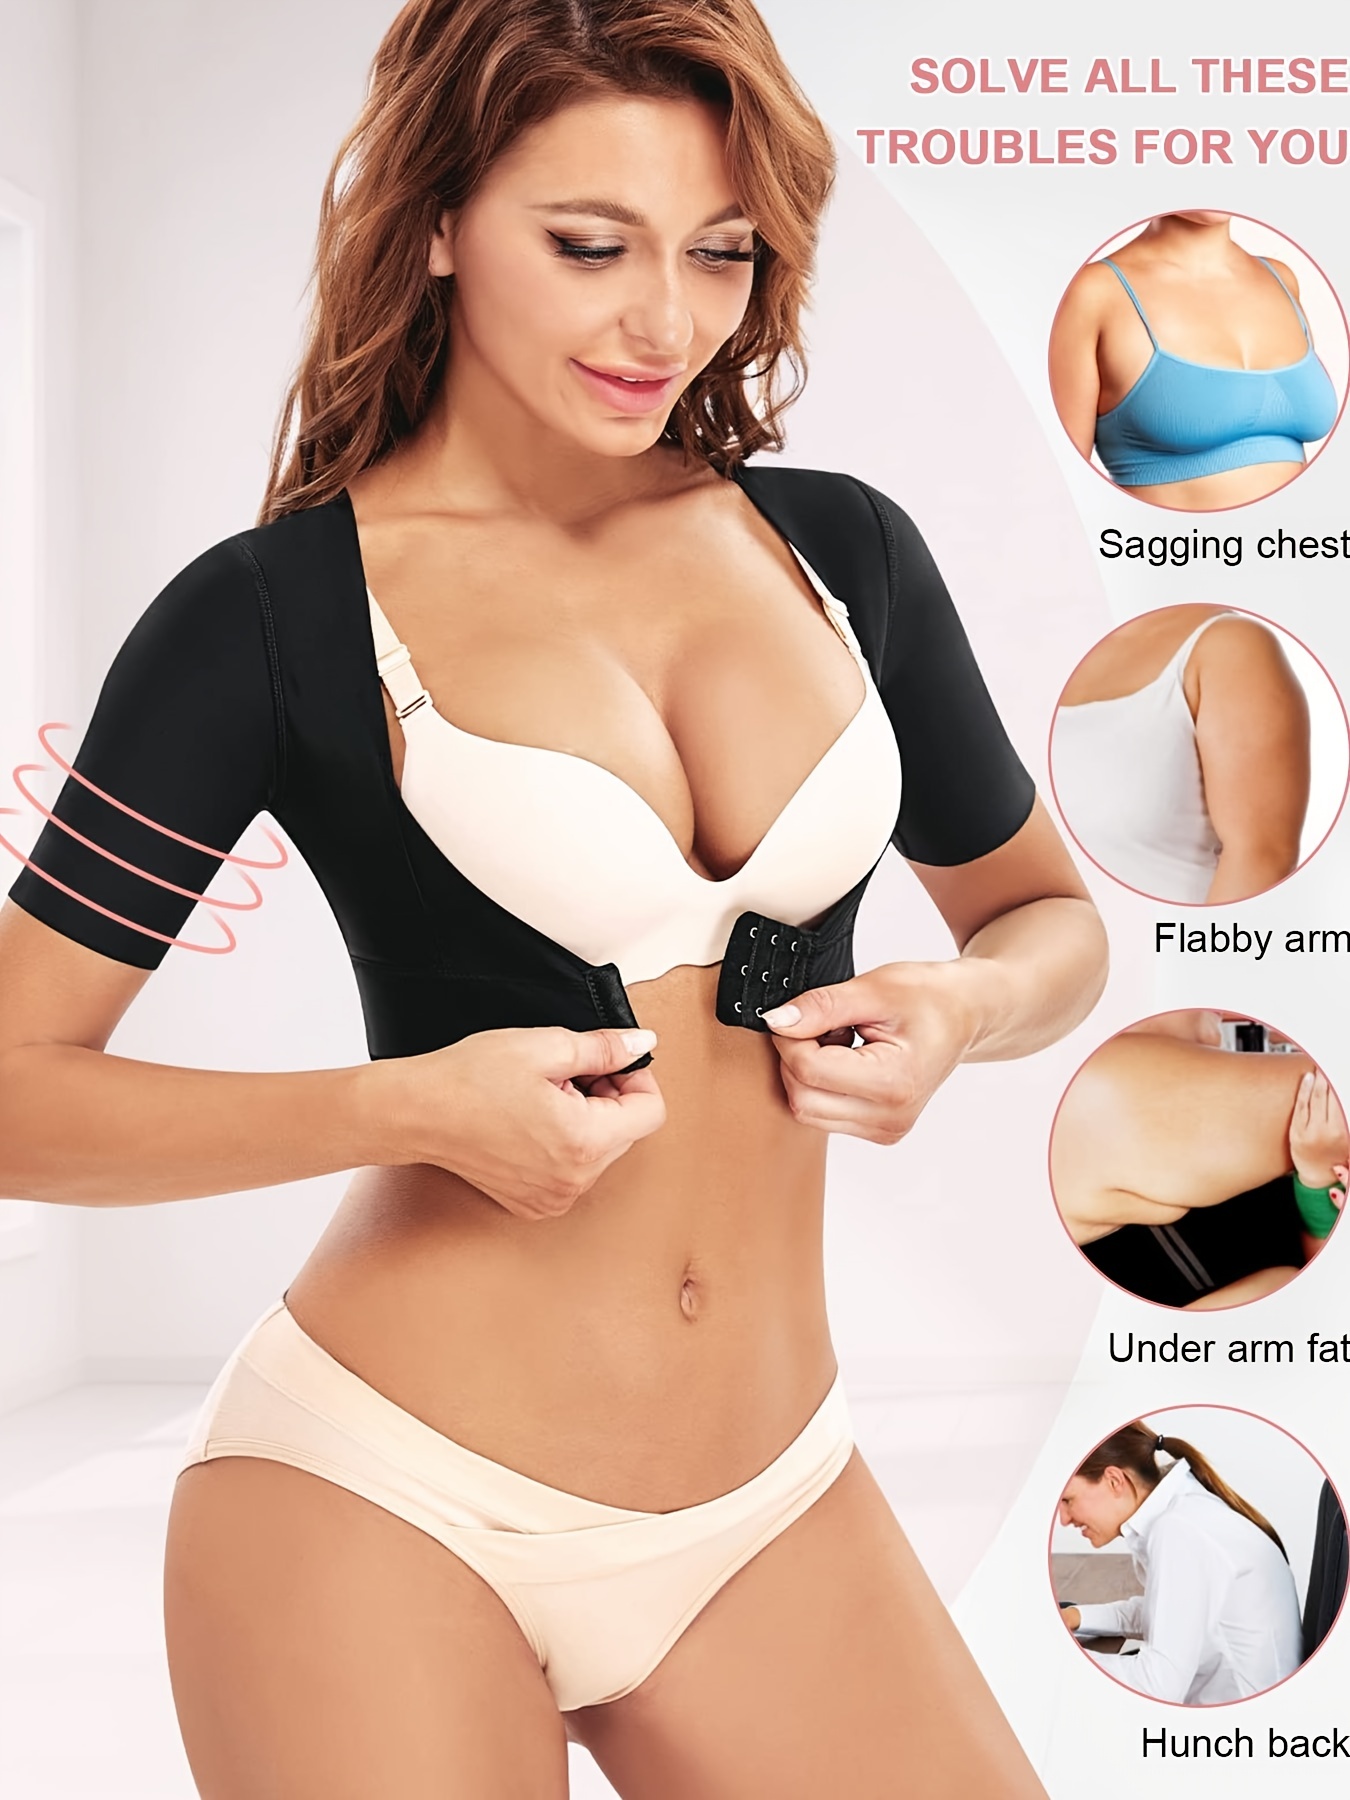 Upper Arm Shapers Long Sleeves Posture Corrector & Push Up Tops